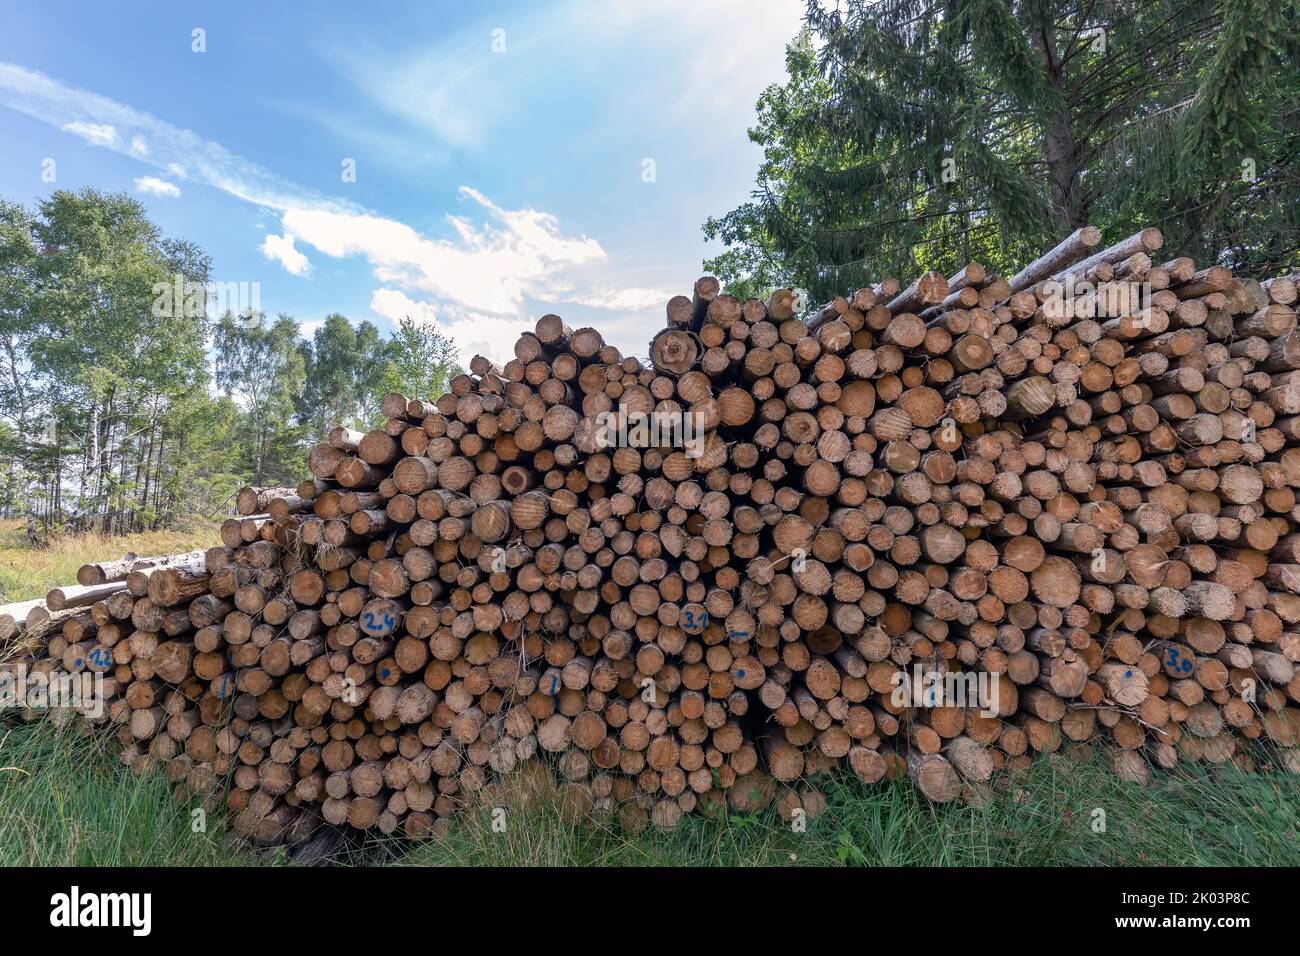 large stack of trees in front of a clear-cut area Stock Photo